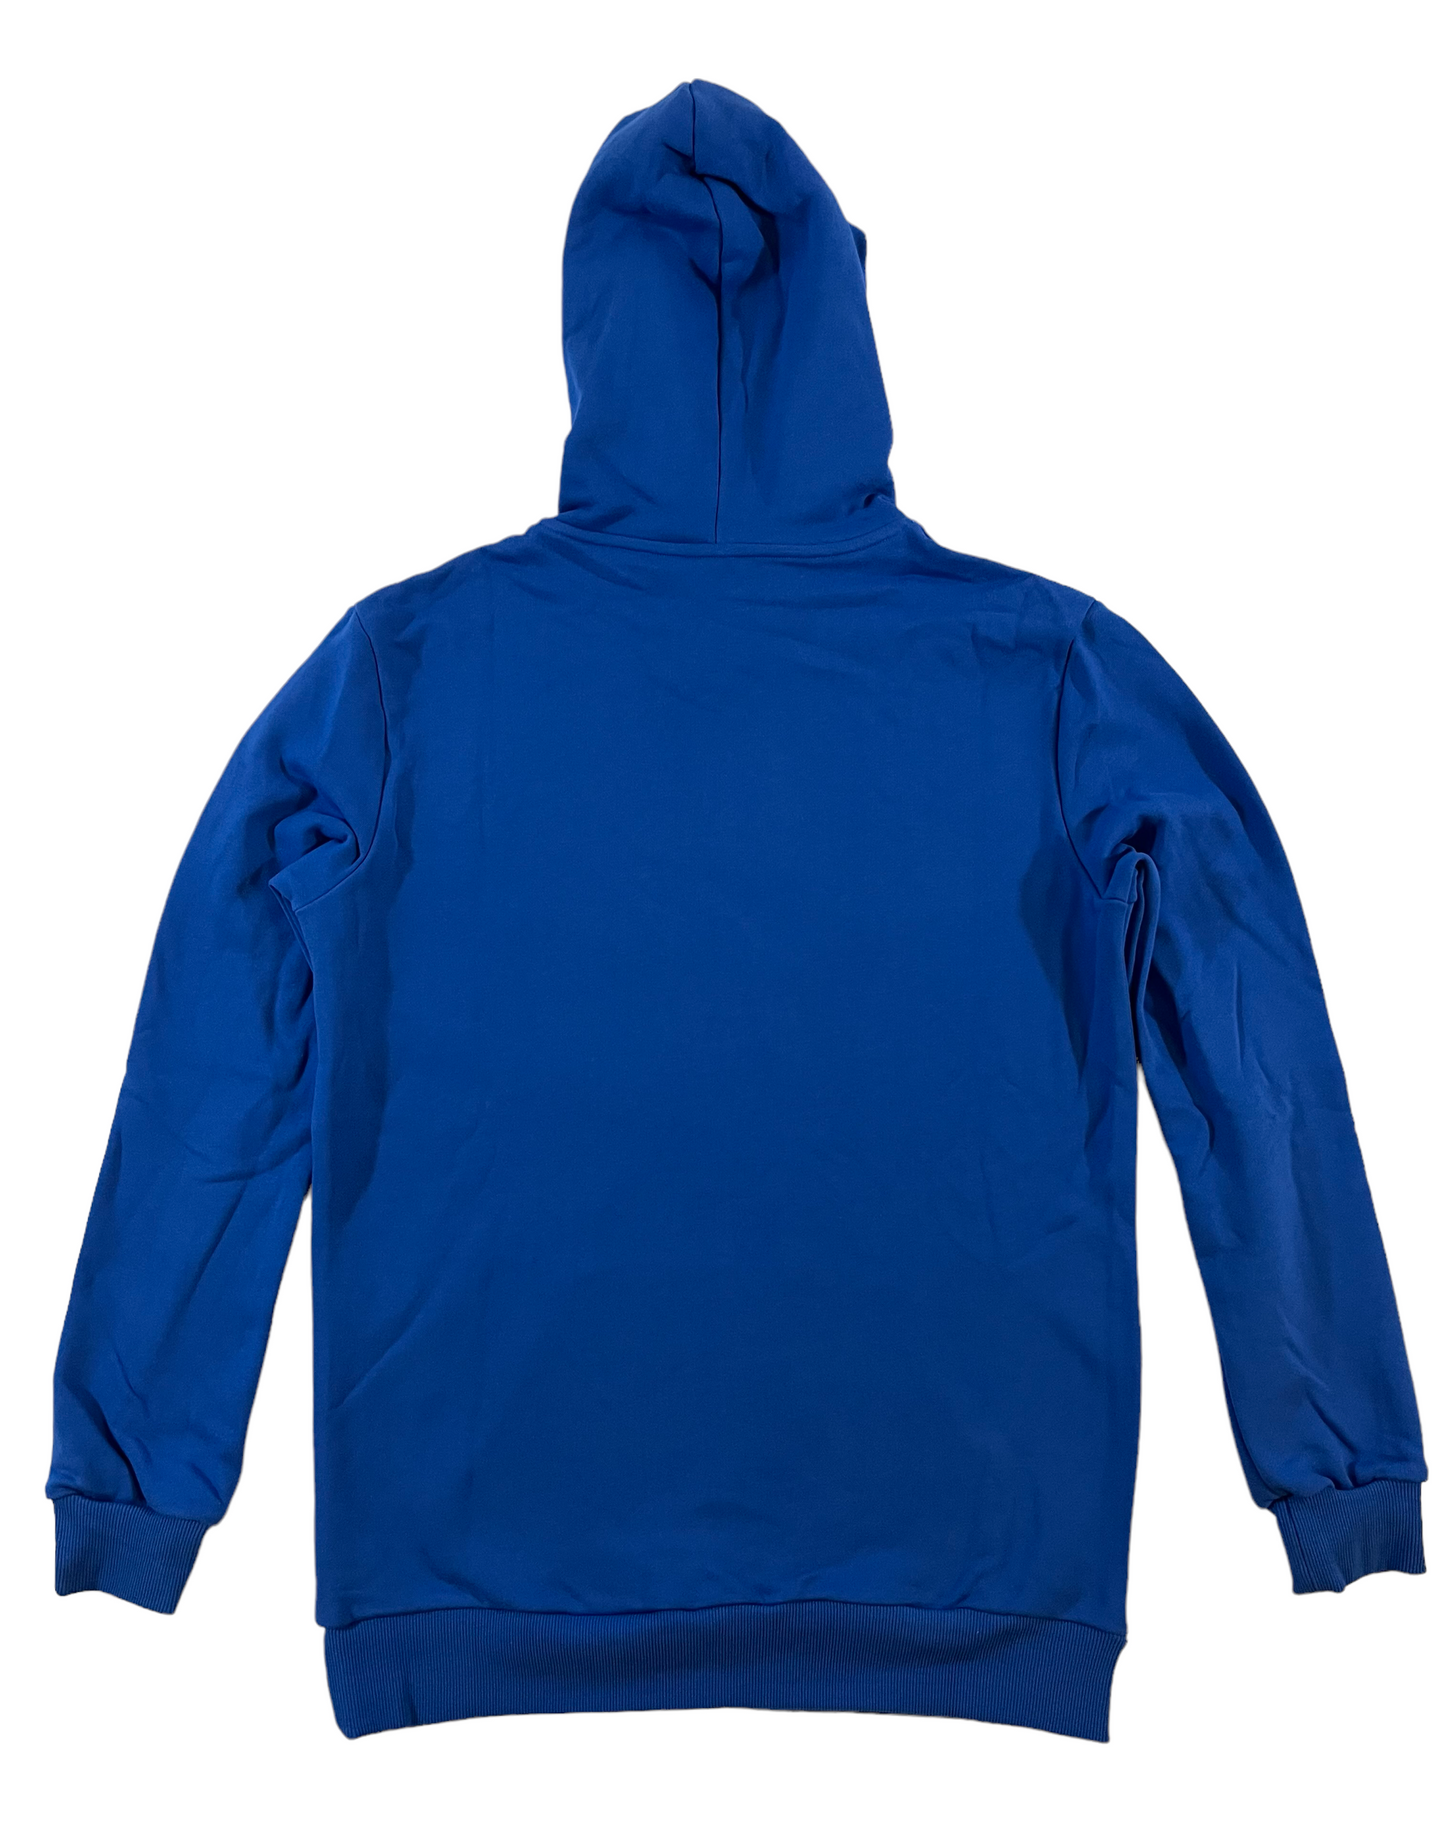 Hoodie - Royal Blue with White Embroidery